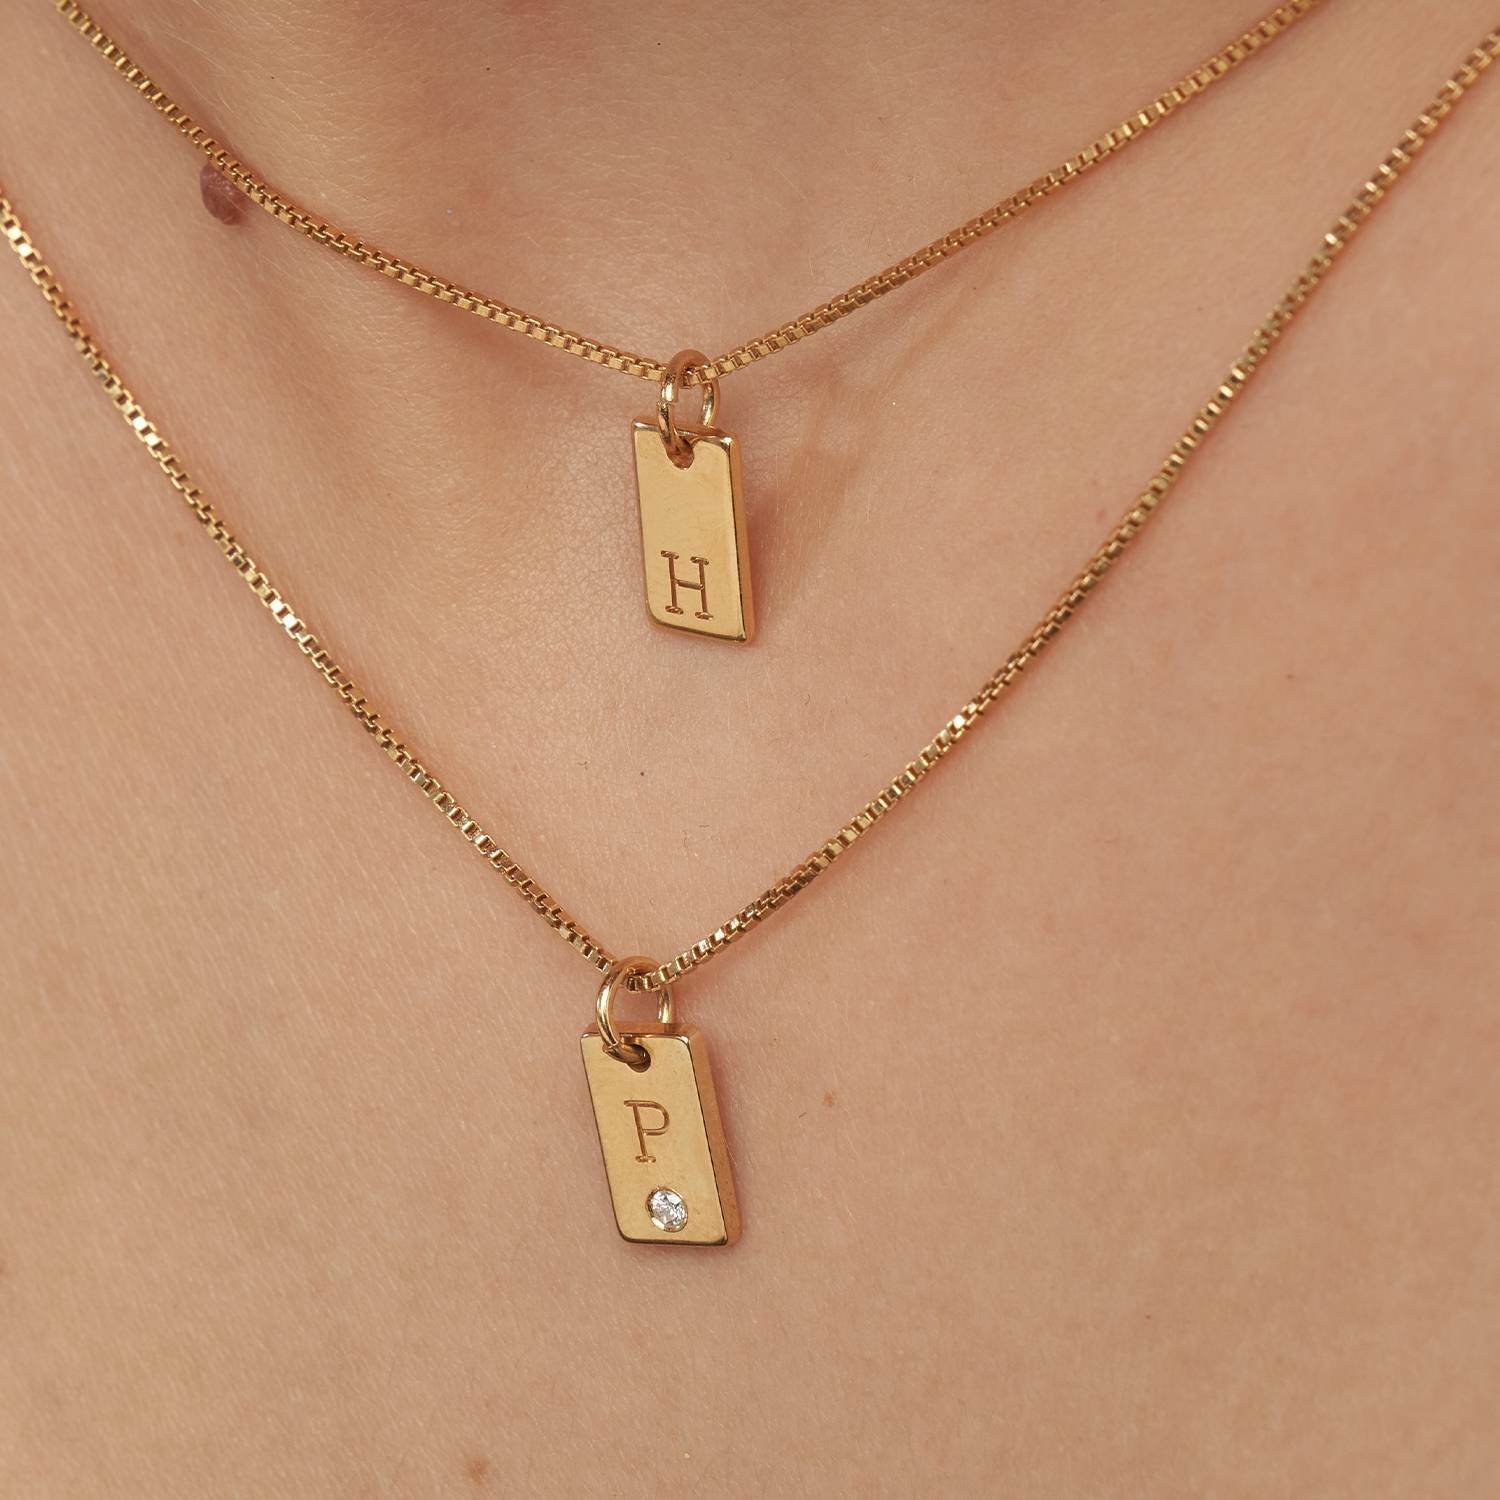 Buy Small Letter P Necklace, Paved Initial P Necklace, Personalized  Jewelry, Tiny Monogram Pendant, Birthday Gift for Her Online in India - Etsy